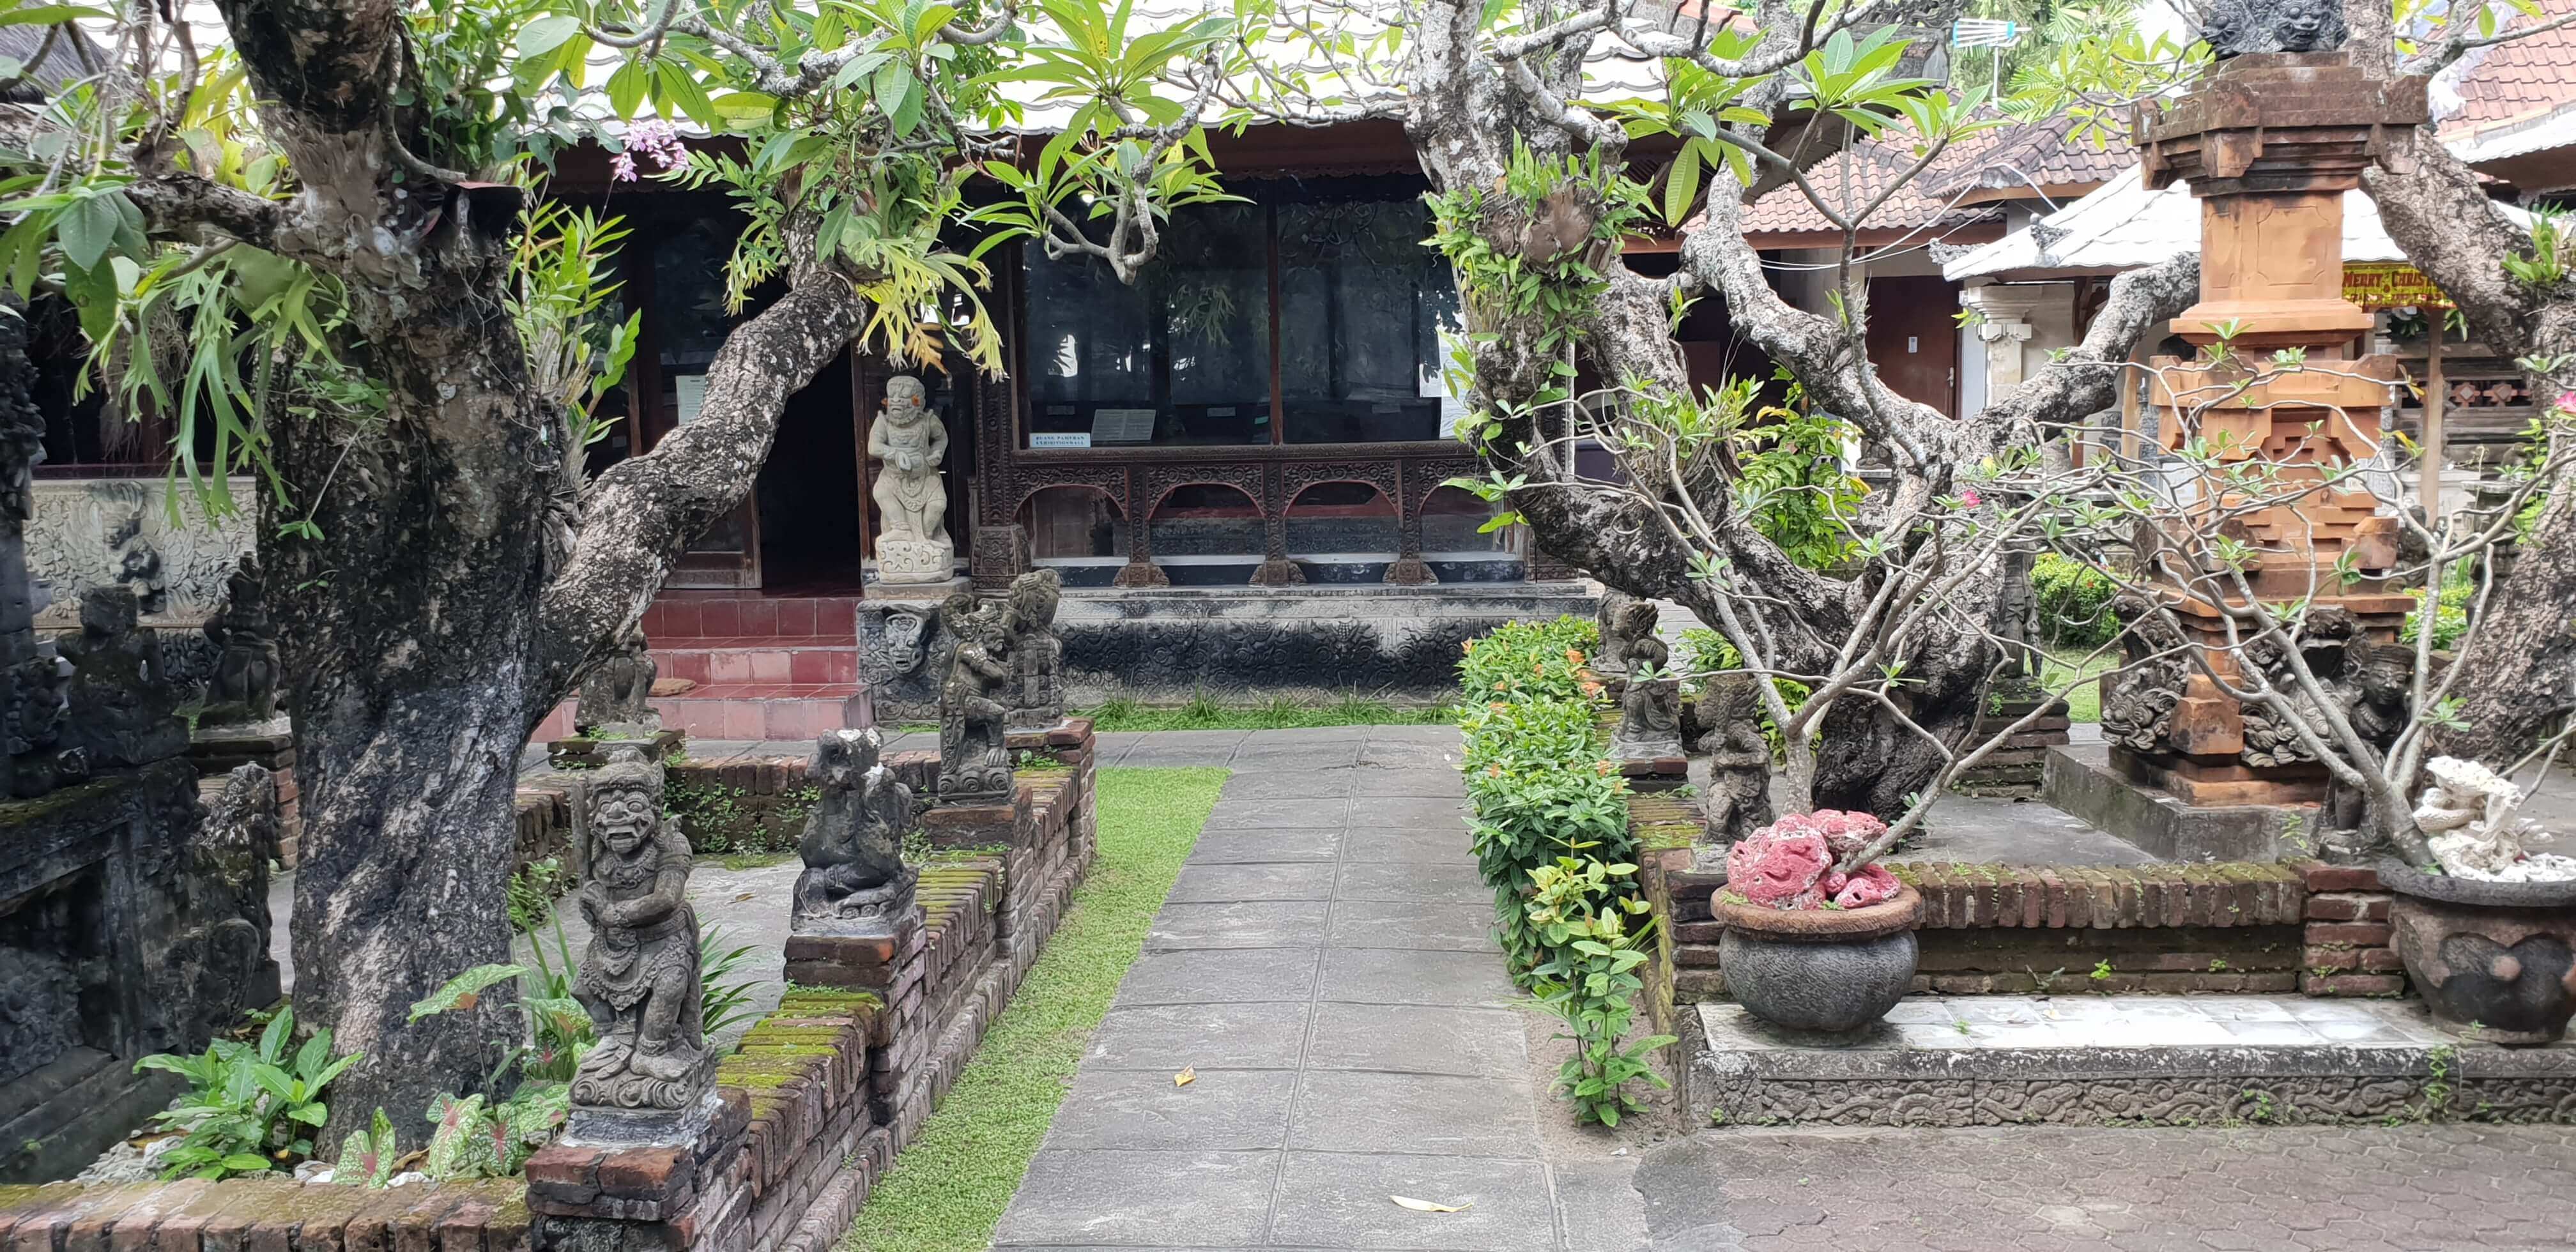 The mansion in Le Mayeur museum is an ideal example of Balinese architecture